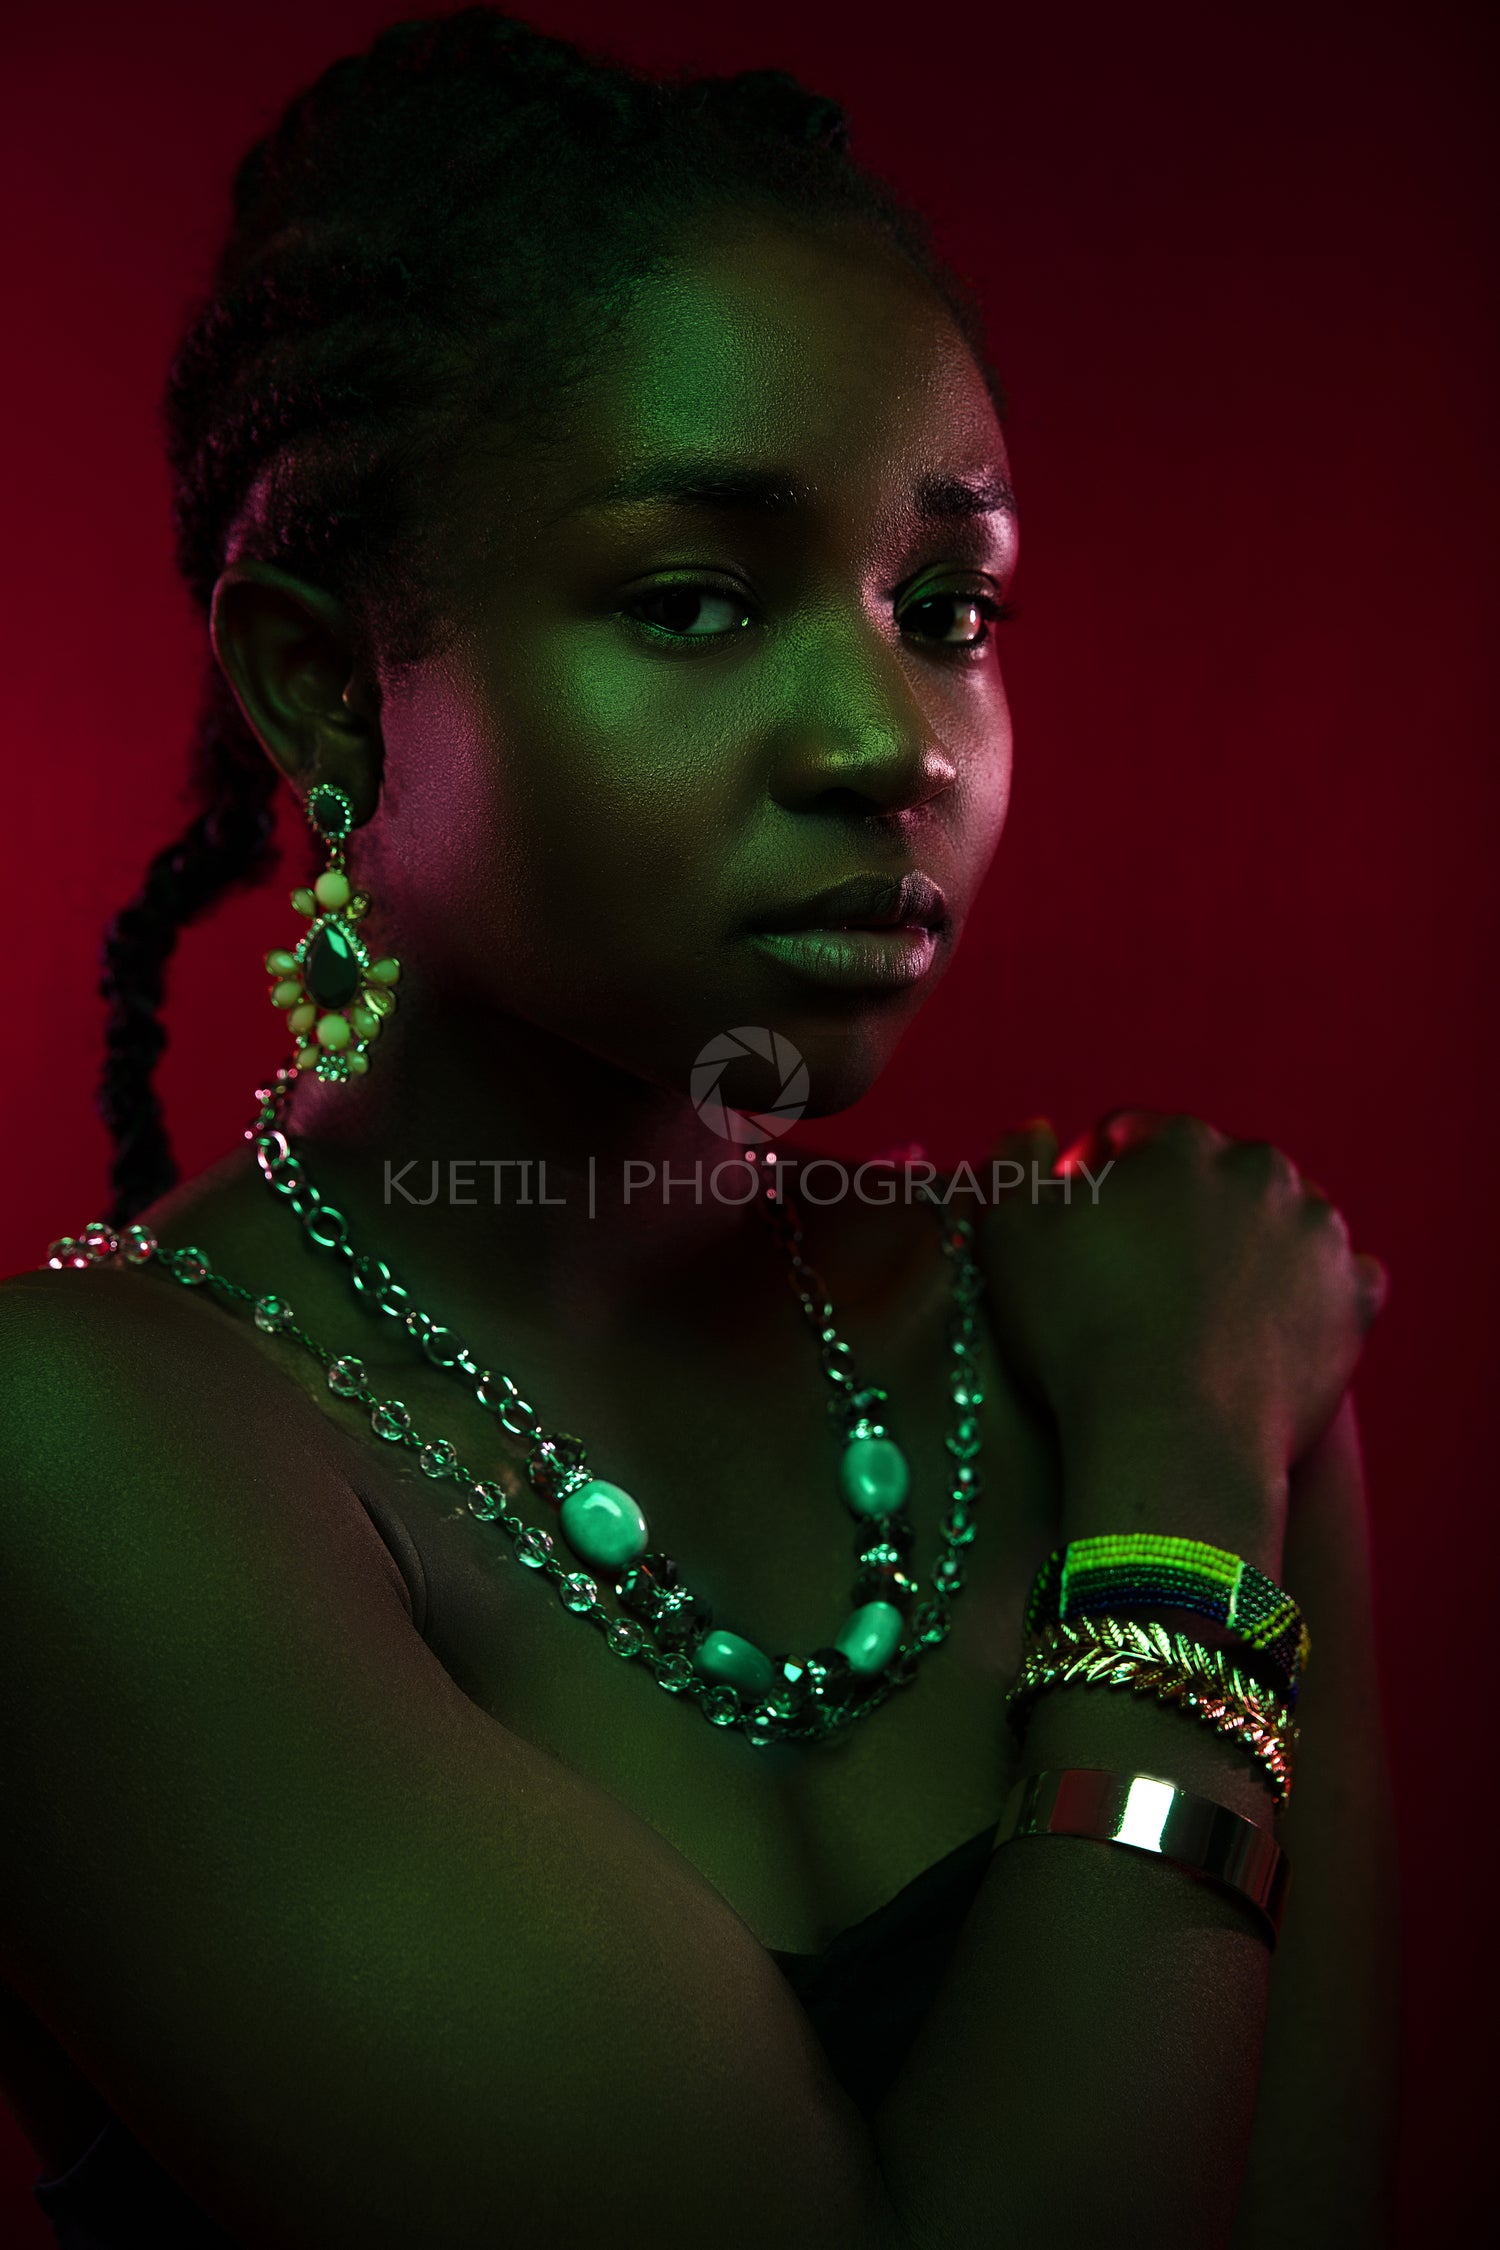 Colorful and creative portrait of beautiful dark african woman on red background